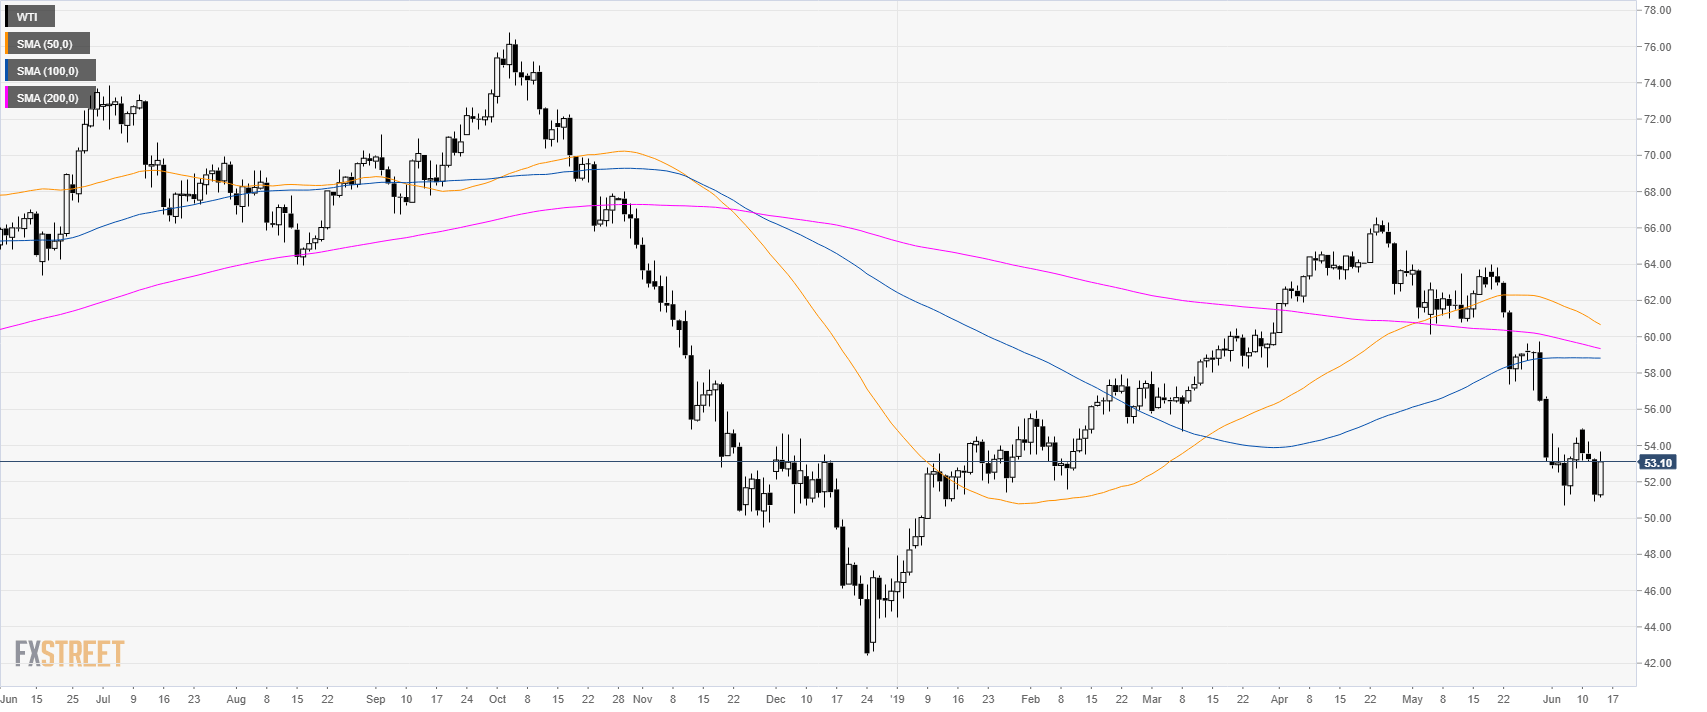 Oil Technical Analysis !   Wti Consolidates Gains After The Overnight Spike - 